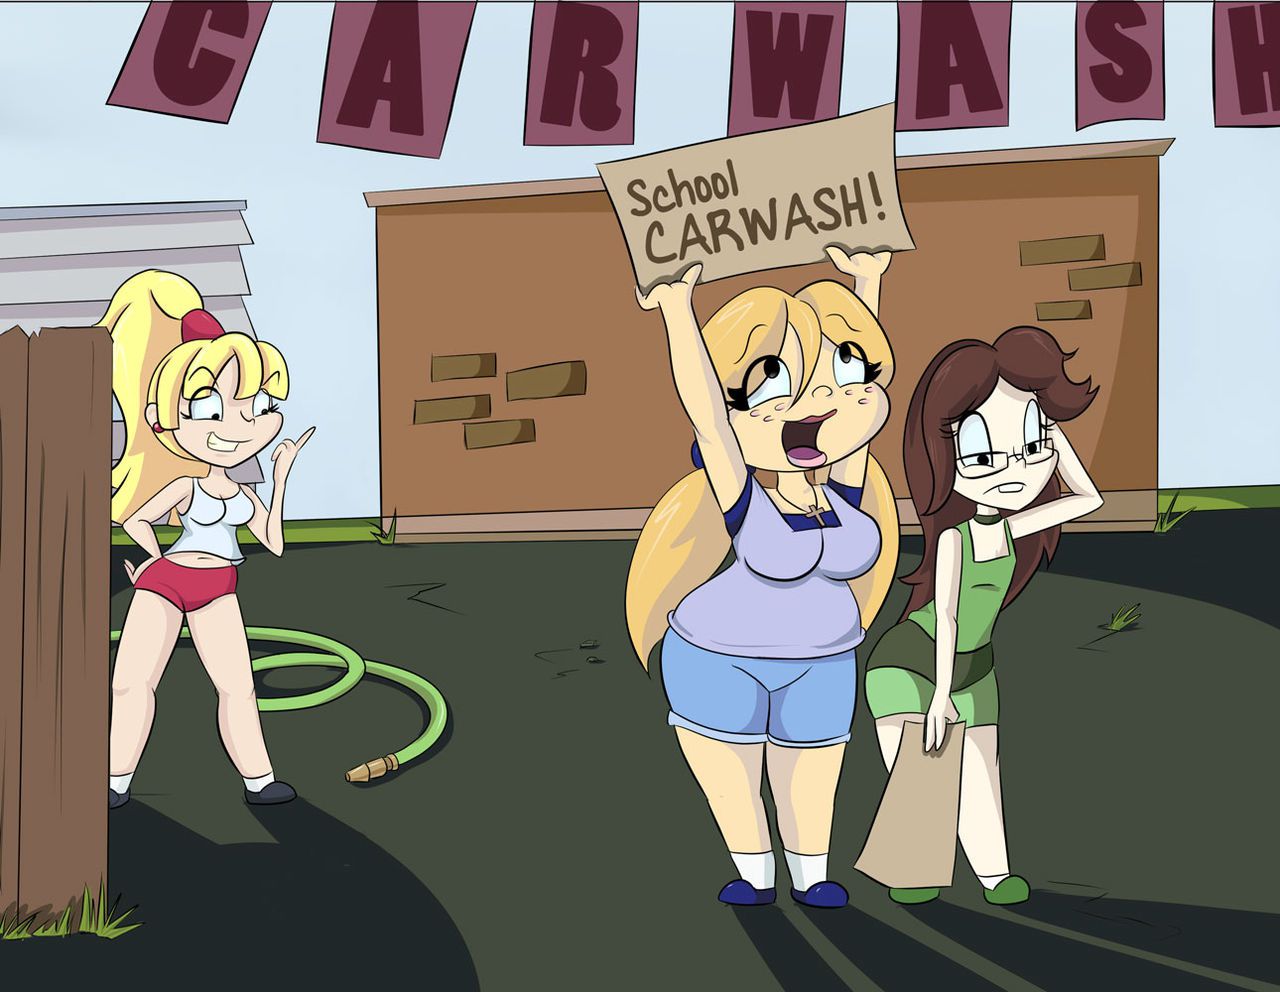 [monkeycheese] Molly's Car Wash [Complete] 1